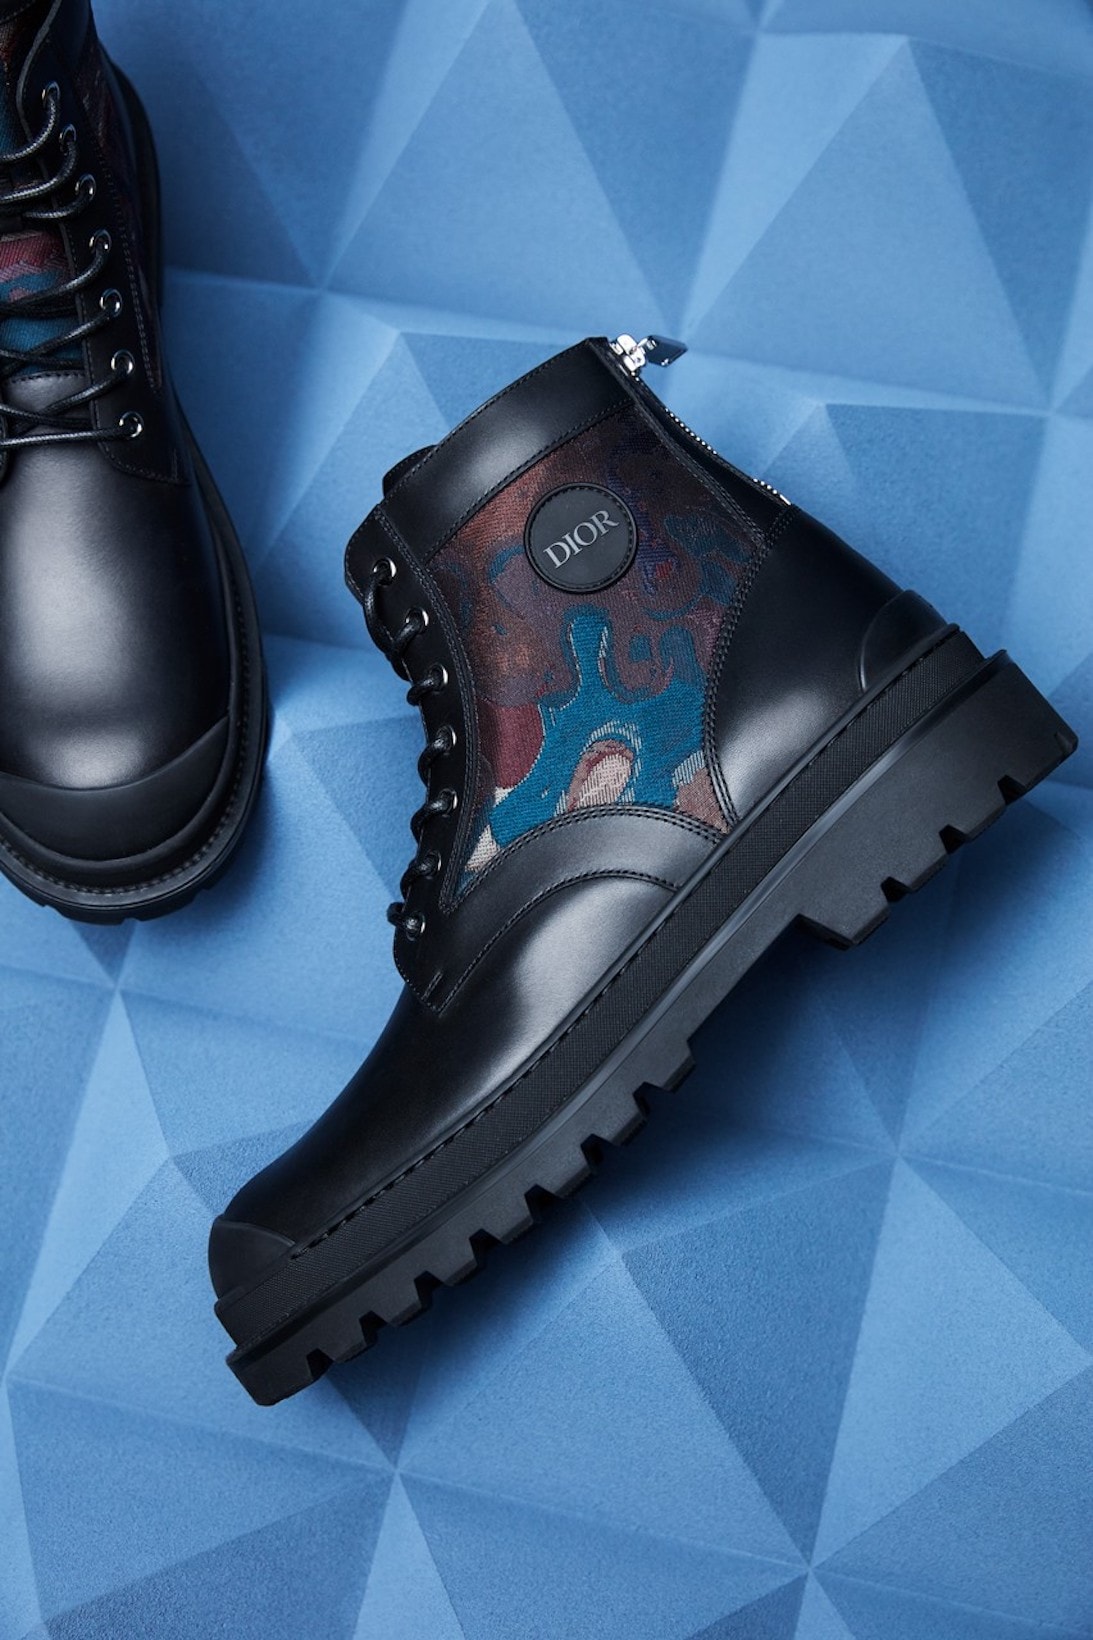 dior fall winter collection boots black blue print lateral